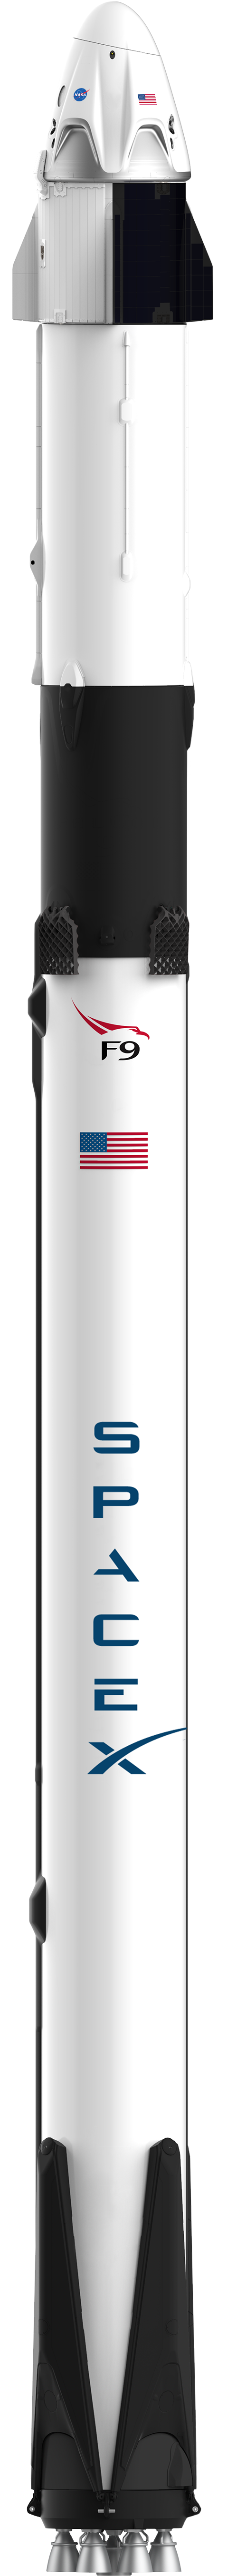 falcon9-render.png